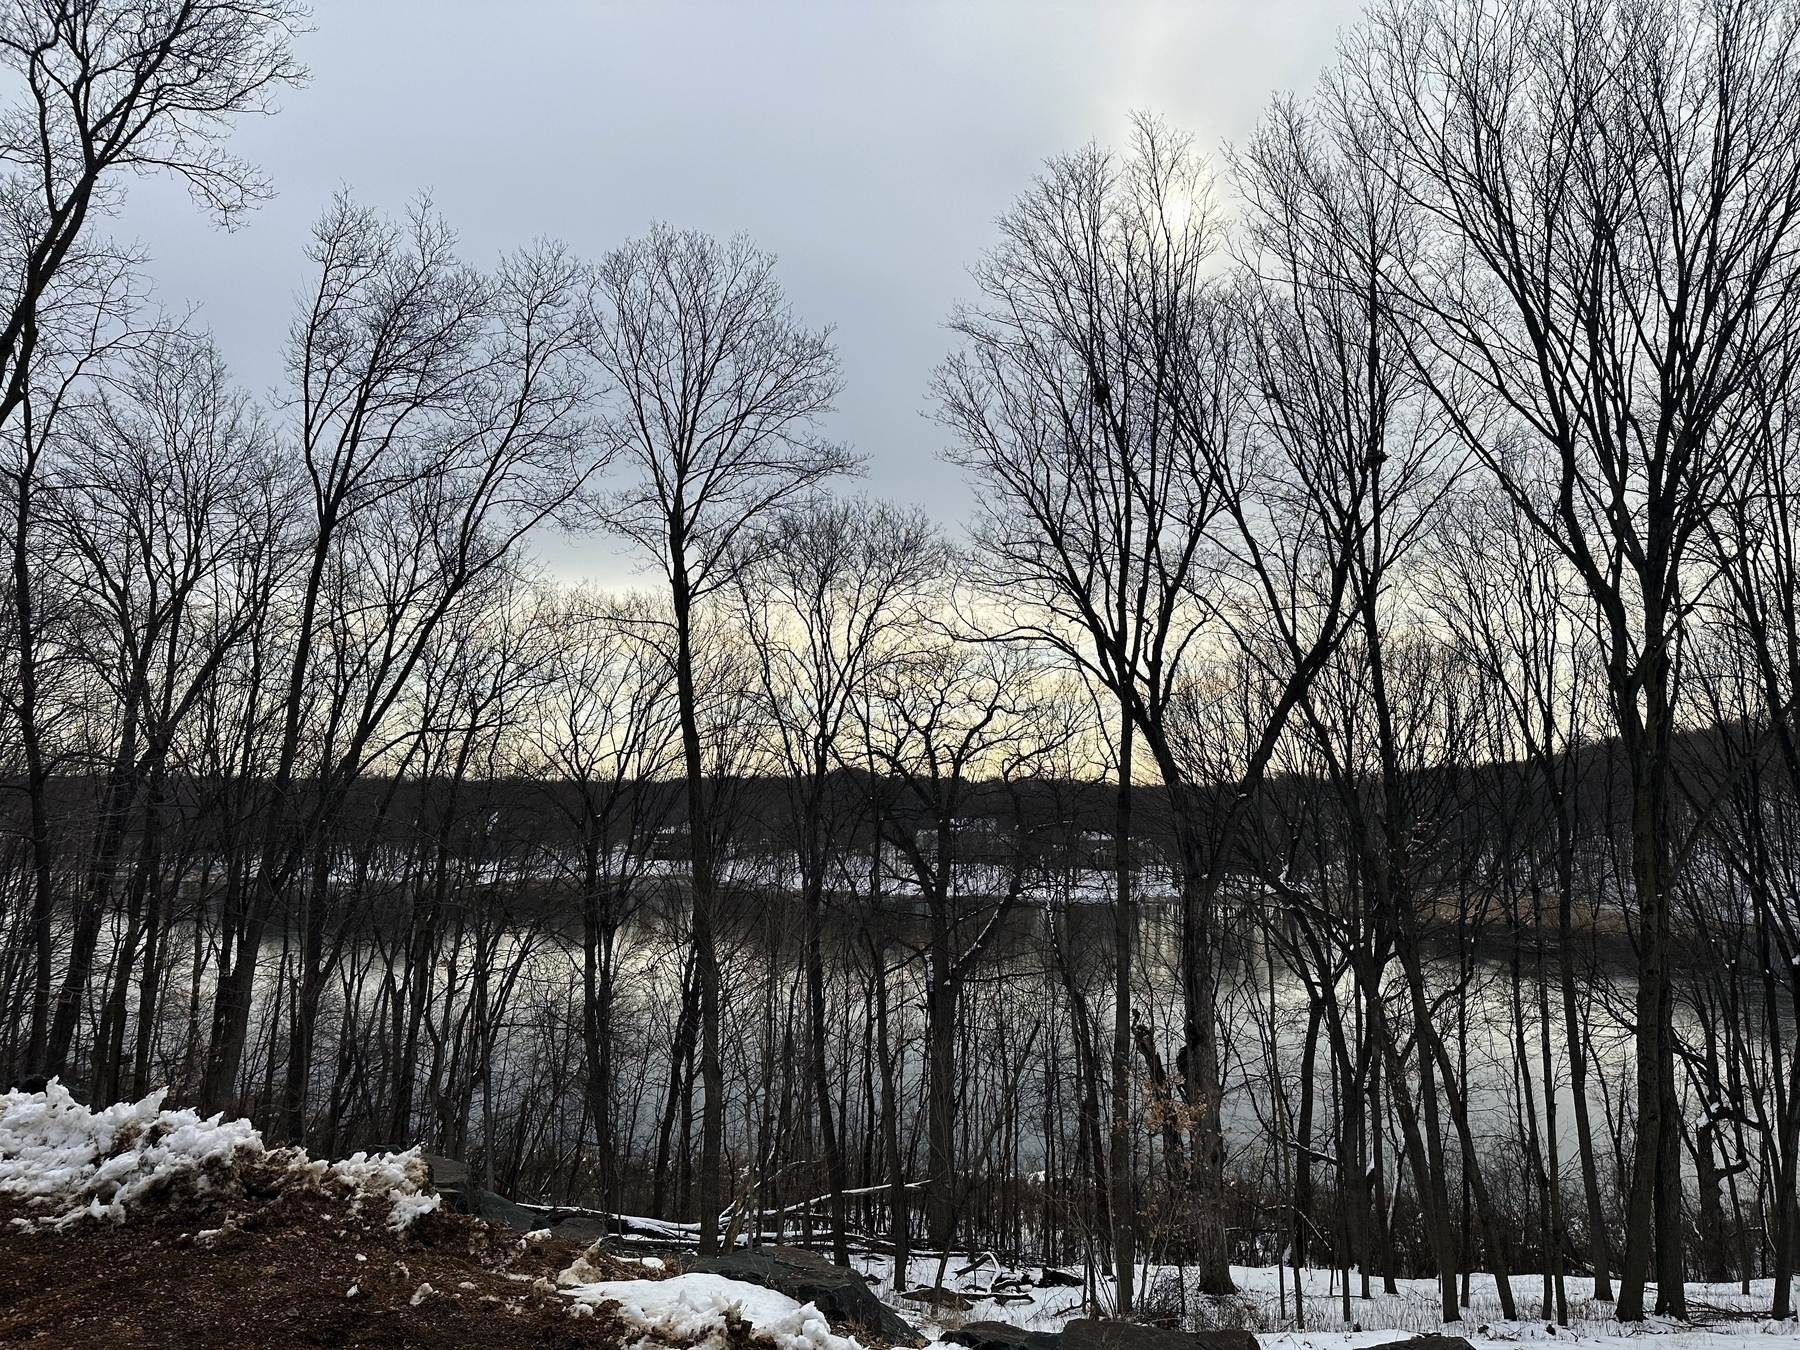 Bare trees silhouette against a cloudy sky, overlooking a calm lake with remnants of snow on the ground; a serene winter landscape.